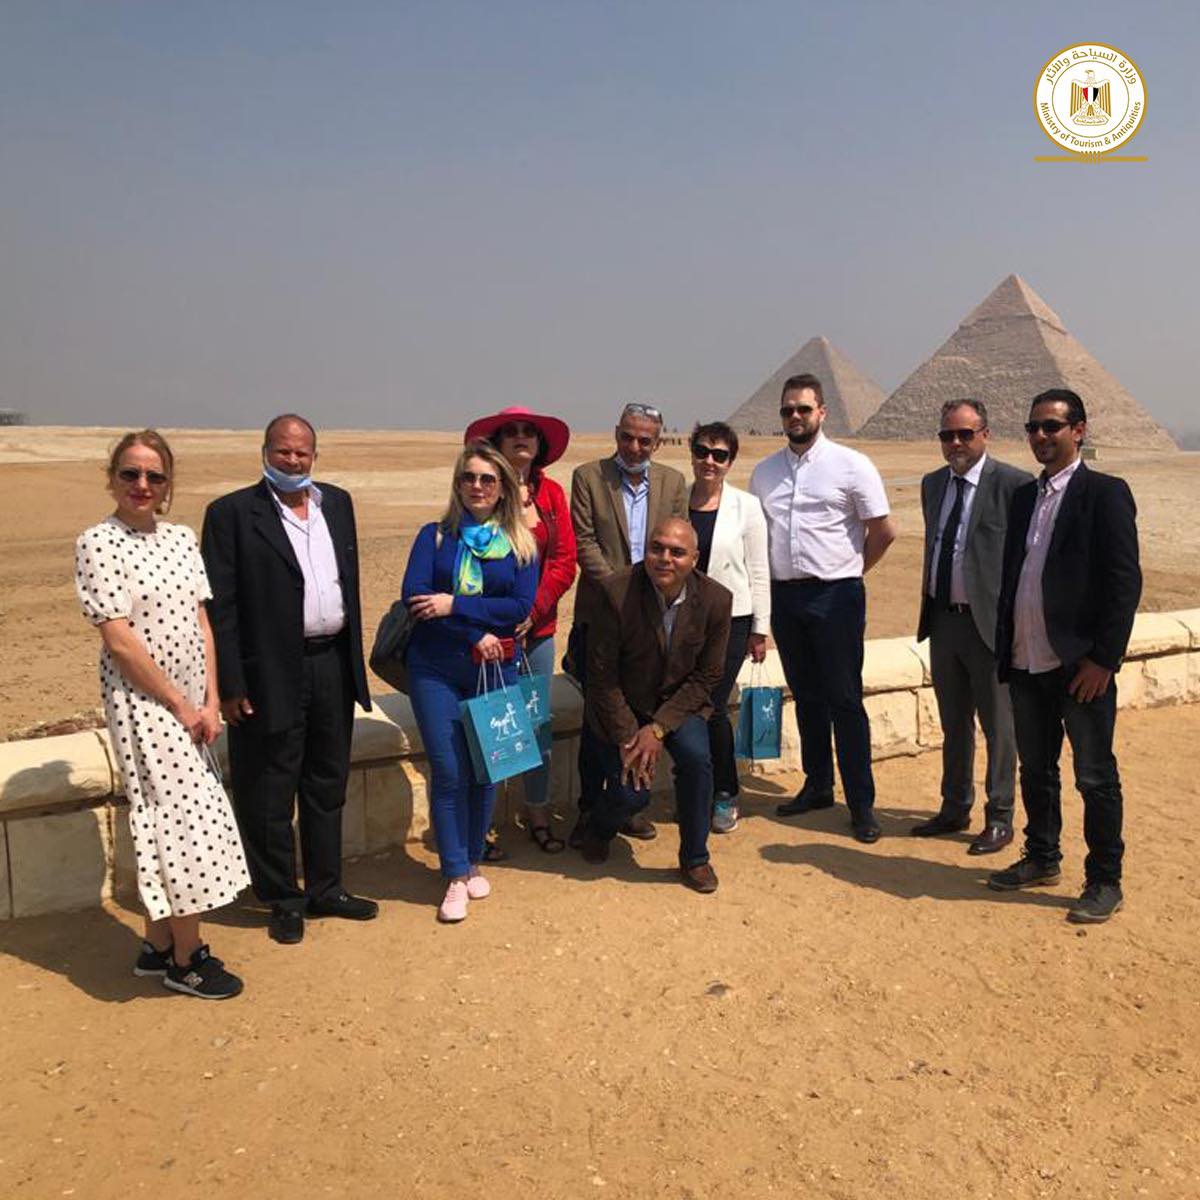 Delegation from Belarus during a visit to the Great Pyramids of Giza - Min of Tourism & Antiquities